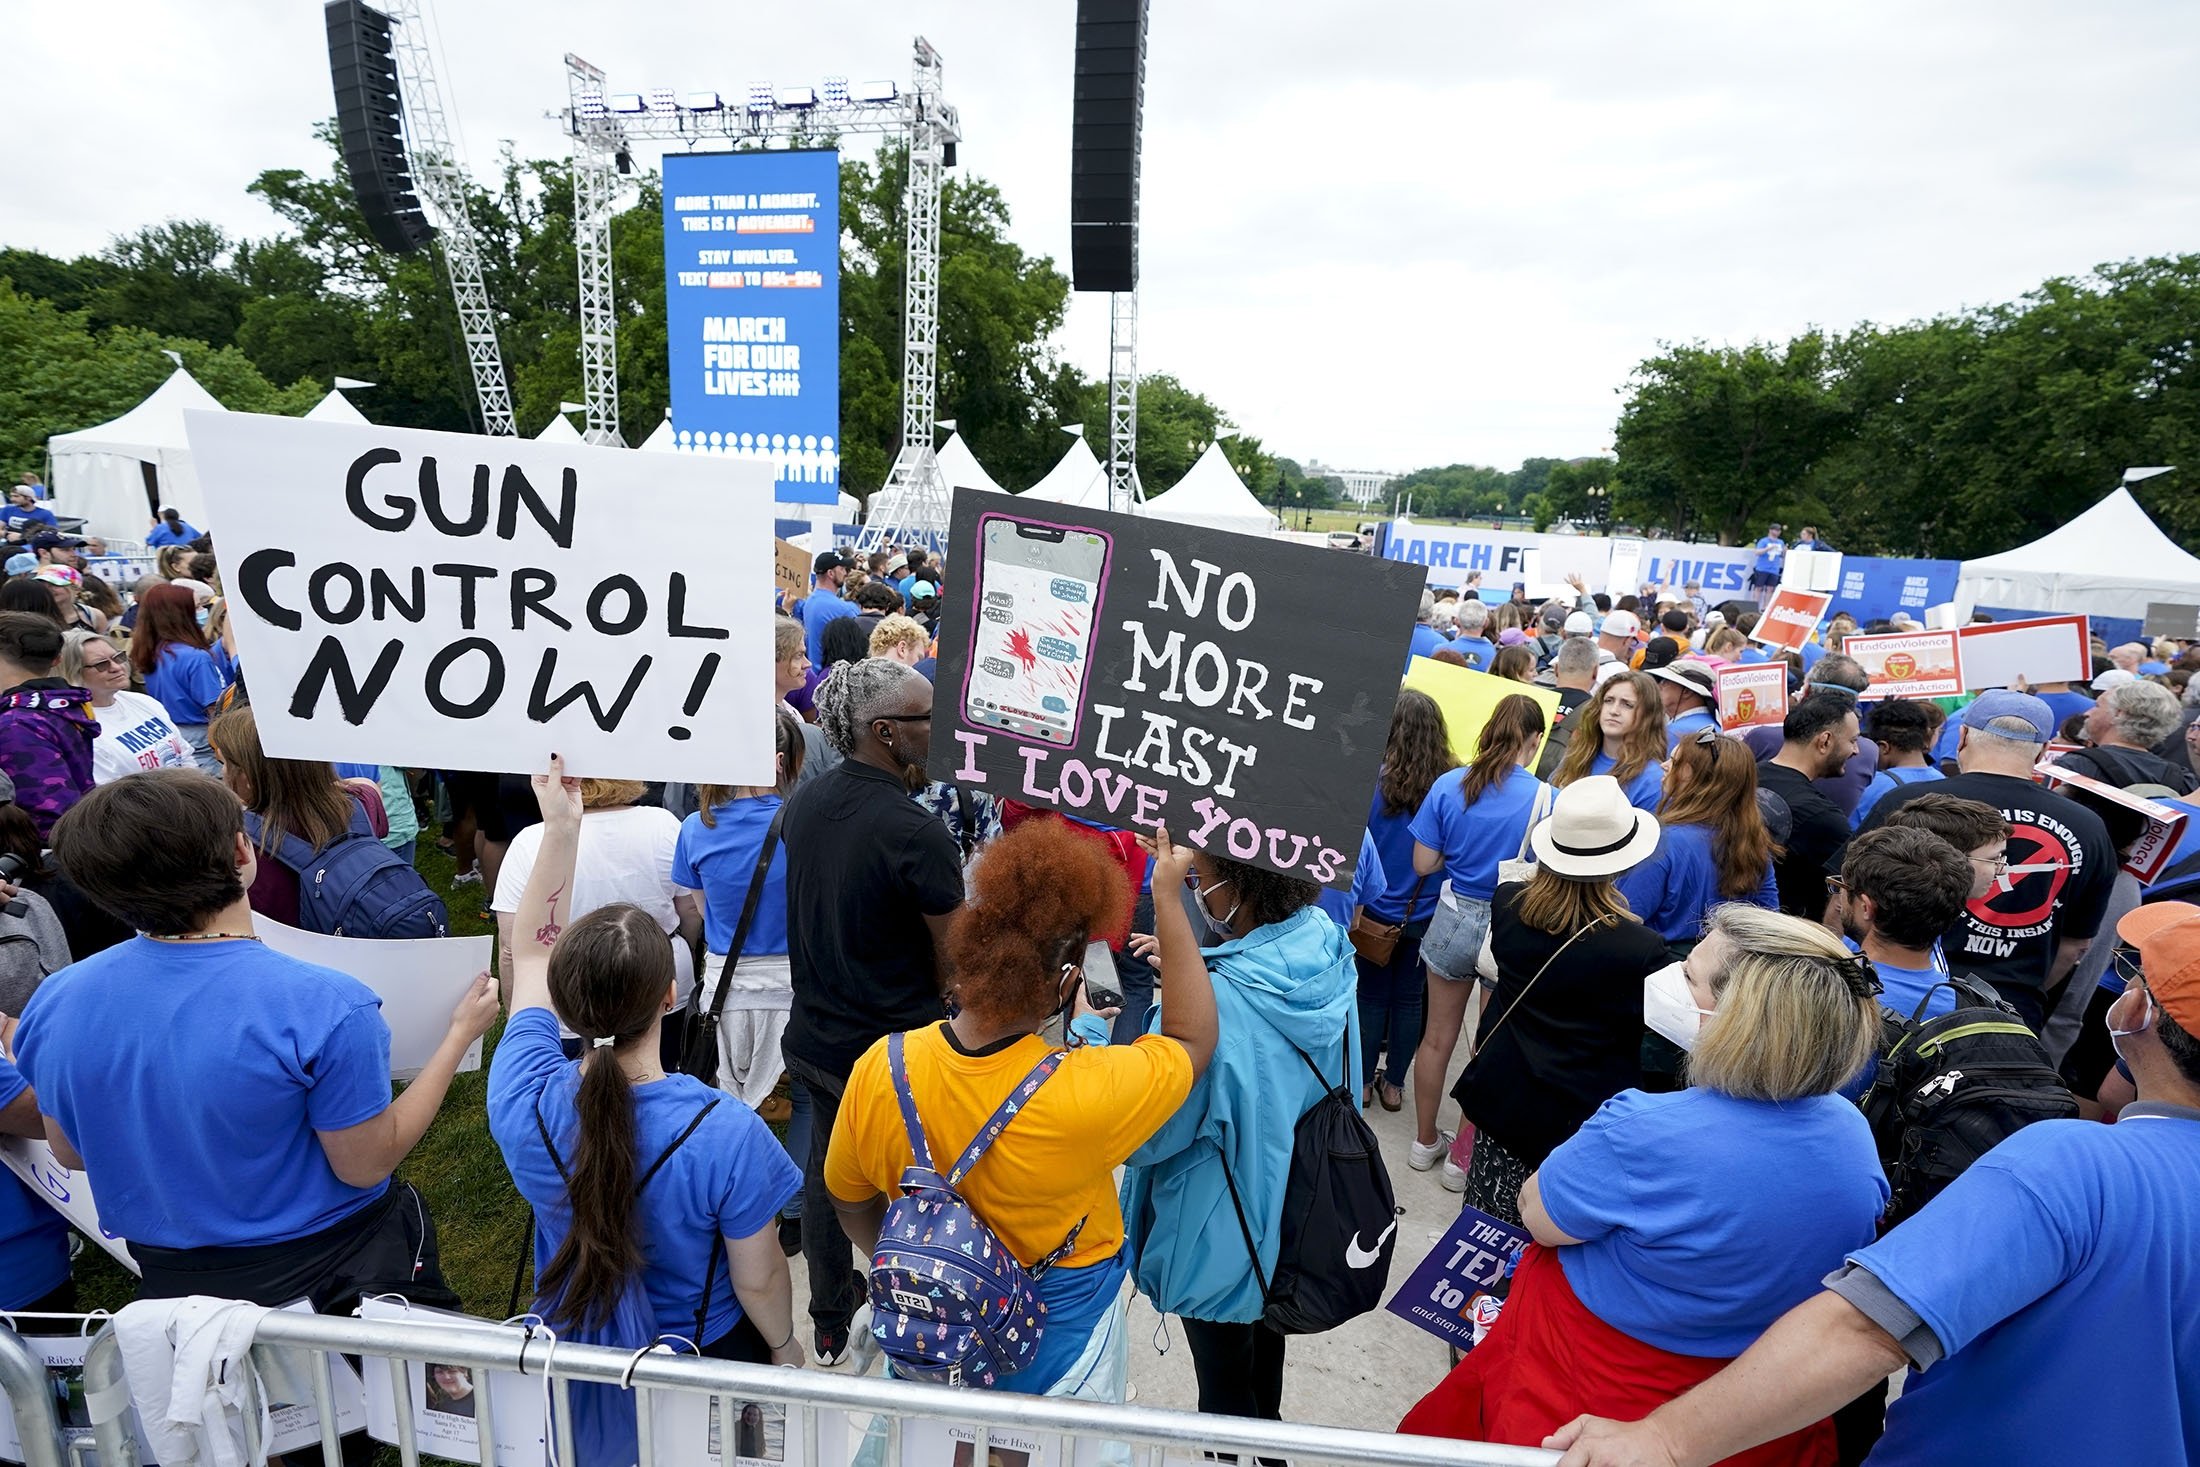 People arrive to attend the second March for Our Lives rally in support of gun control in front of the Washington Monument, in Washington, U.S., June 11, 2022. (AP Photo)